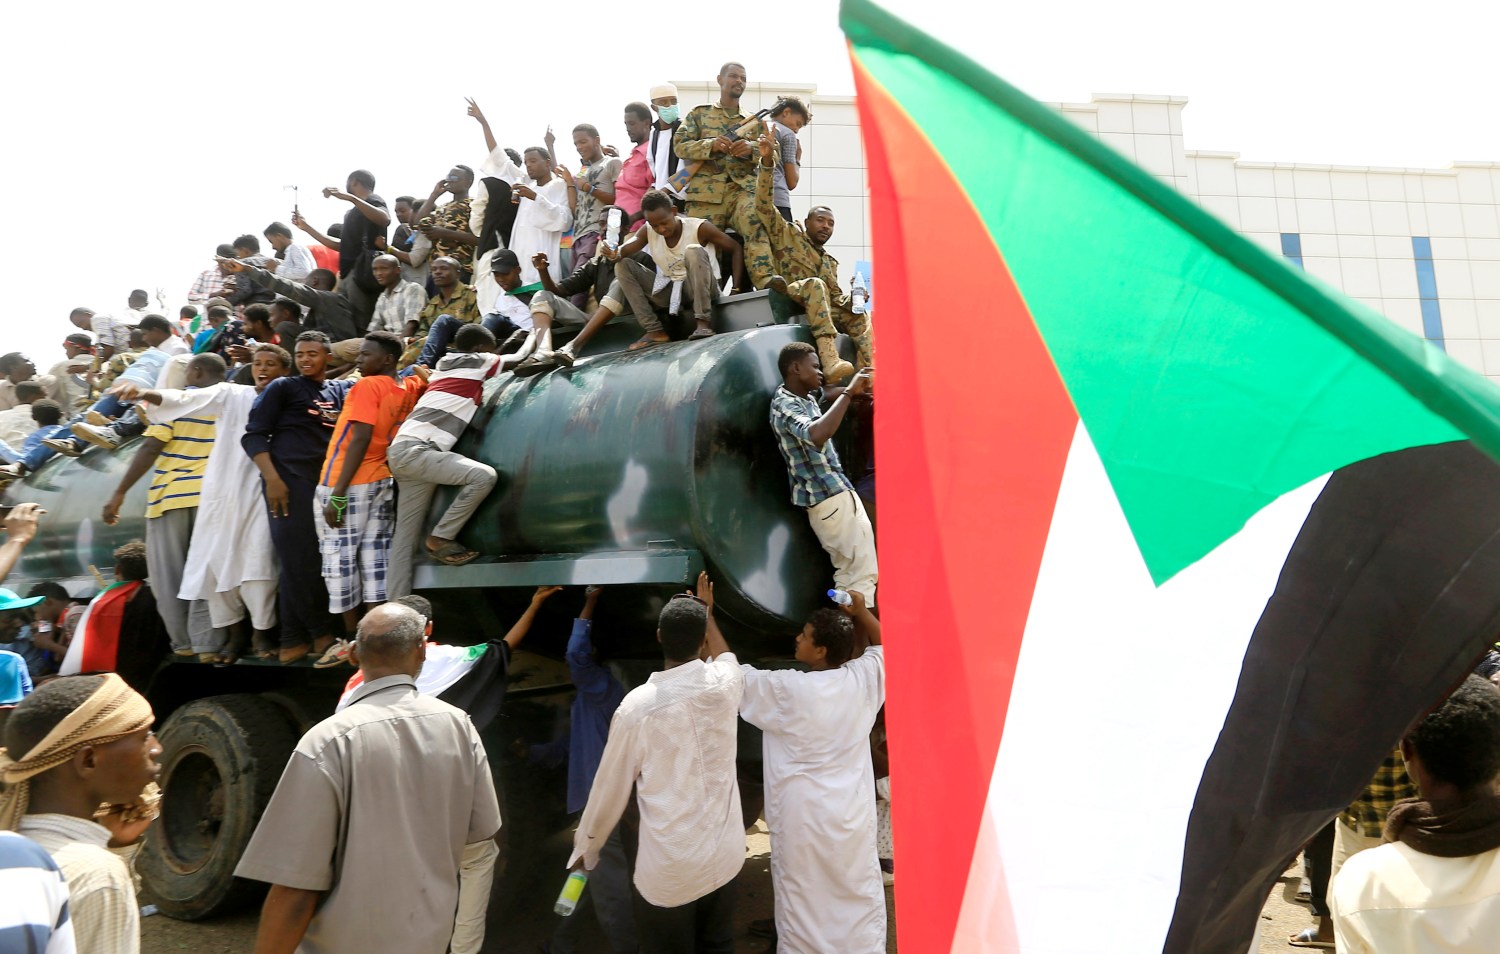 Sudanese military officers and demonstrators ride atop a military tanker as they protest against the army's announcement that President Omar al-Bashir would be replaced by a military-led transitional council, near Defence Ministry in Khartoum, Sudan April 12, 2019. REUTERS/Stringer - RC1BA0866340